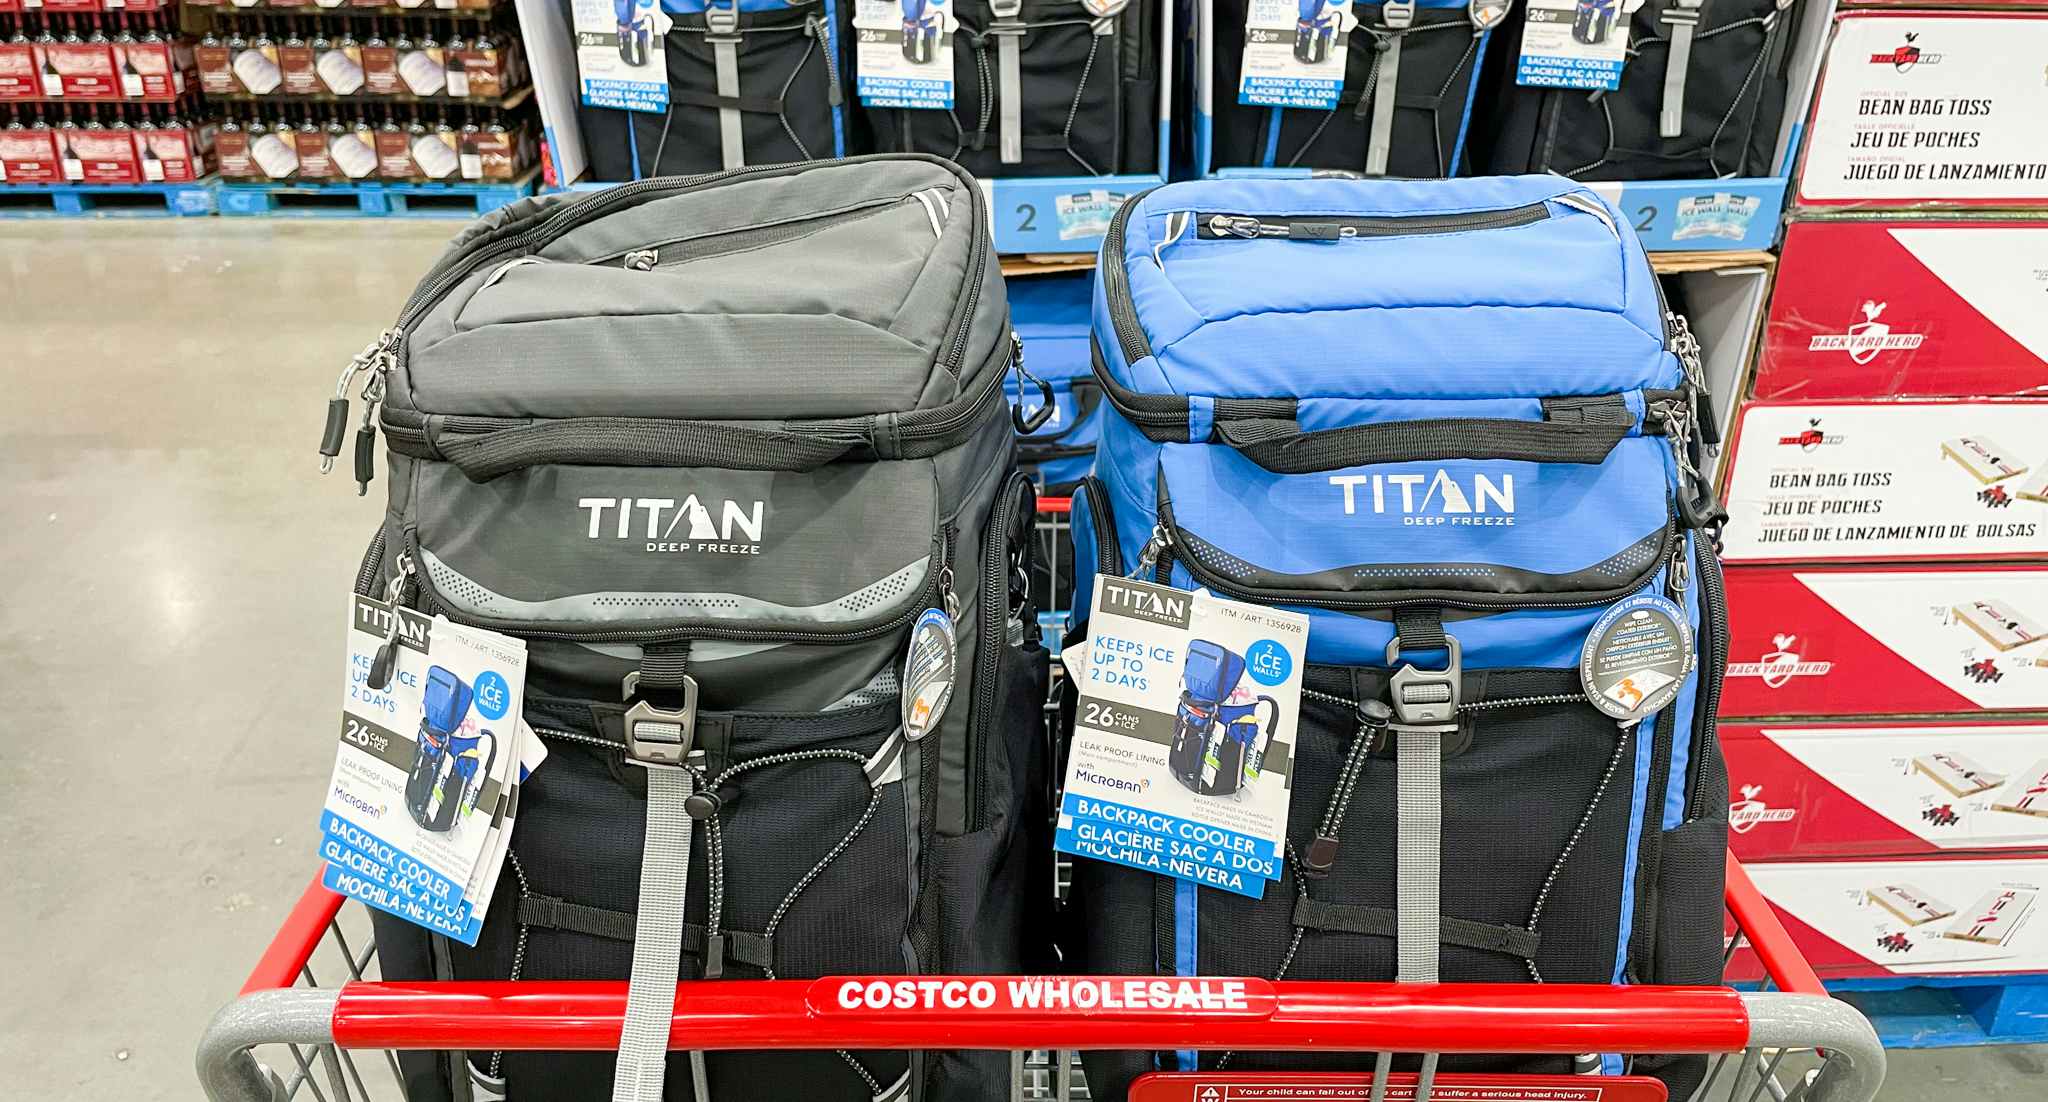 backpack coolers in a cart at costco